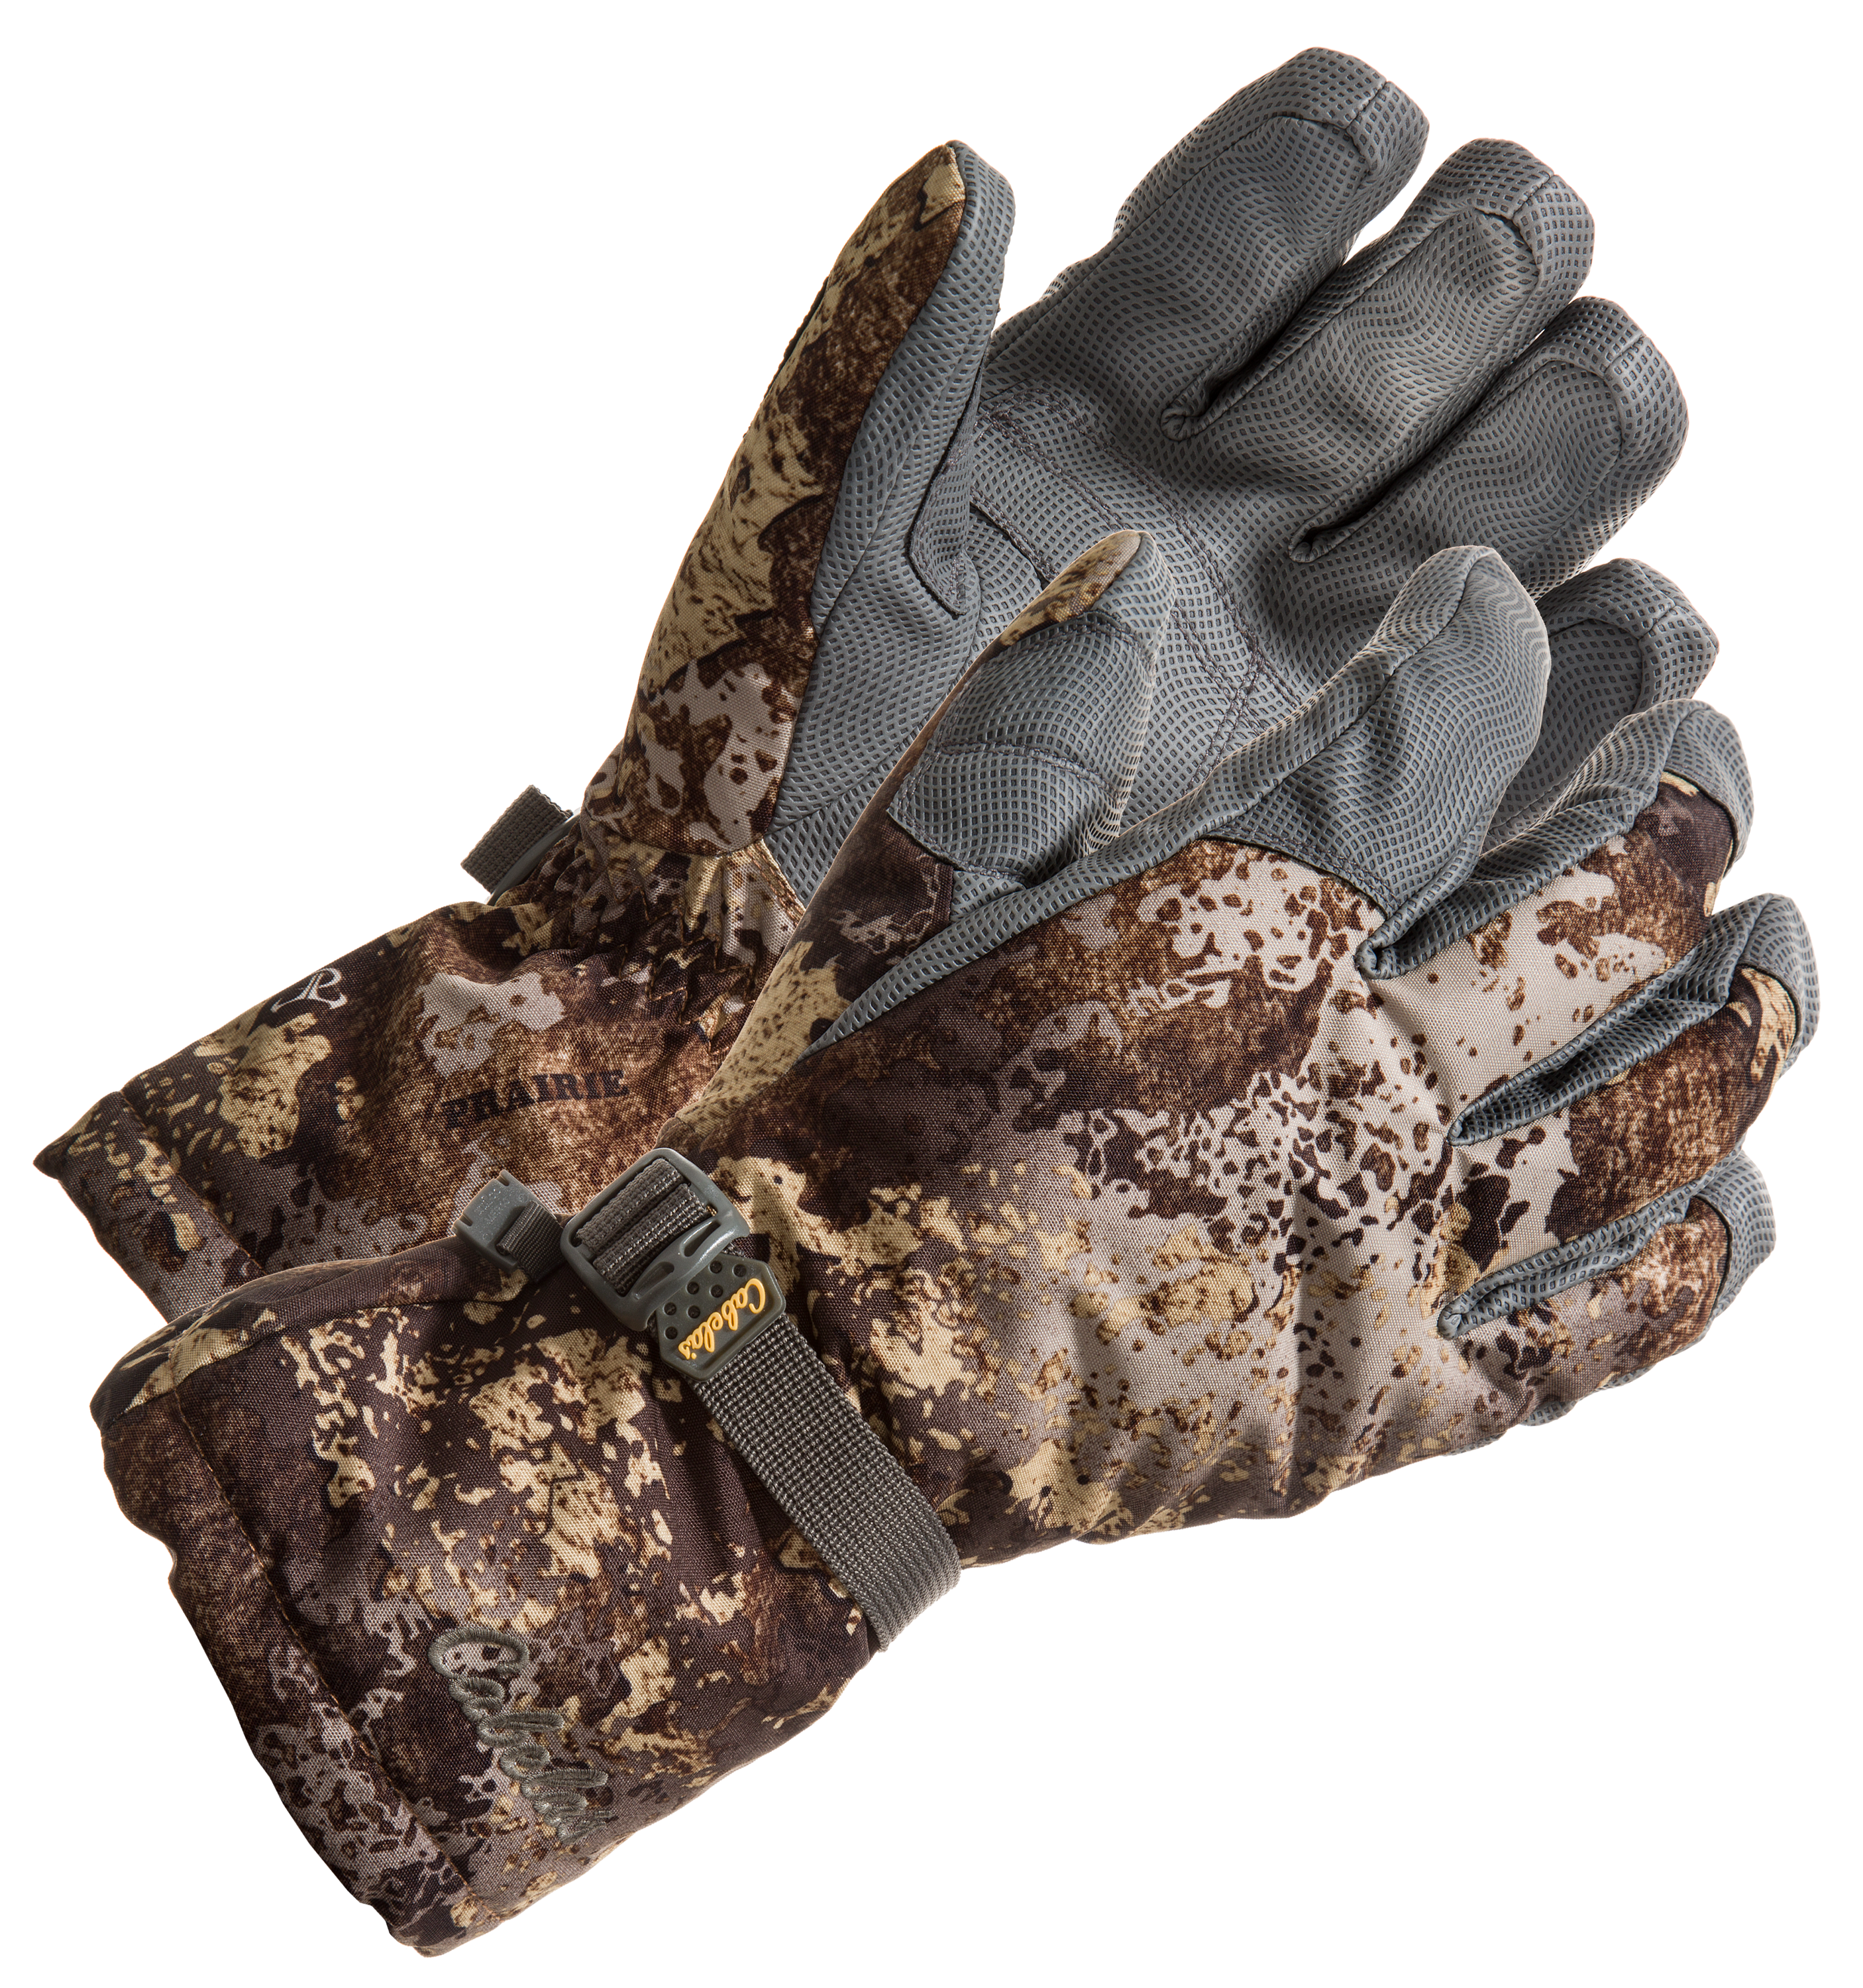 Cabela's Waterfowl GORE-TEX Shooter Gloves for Men